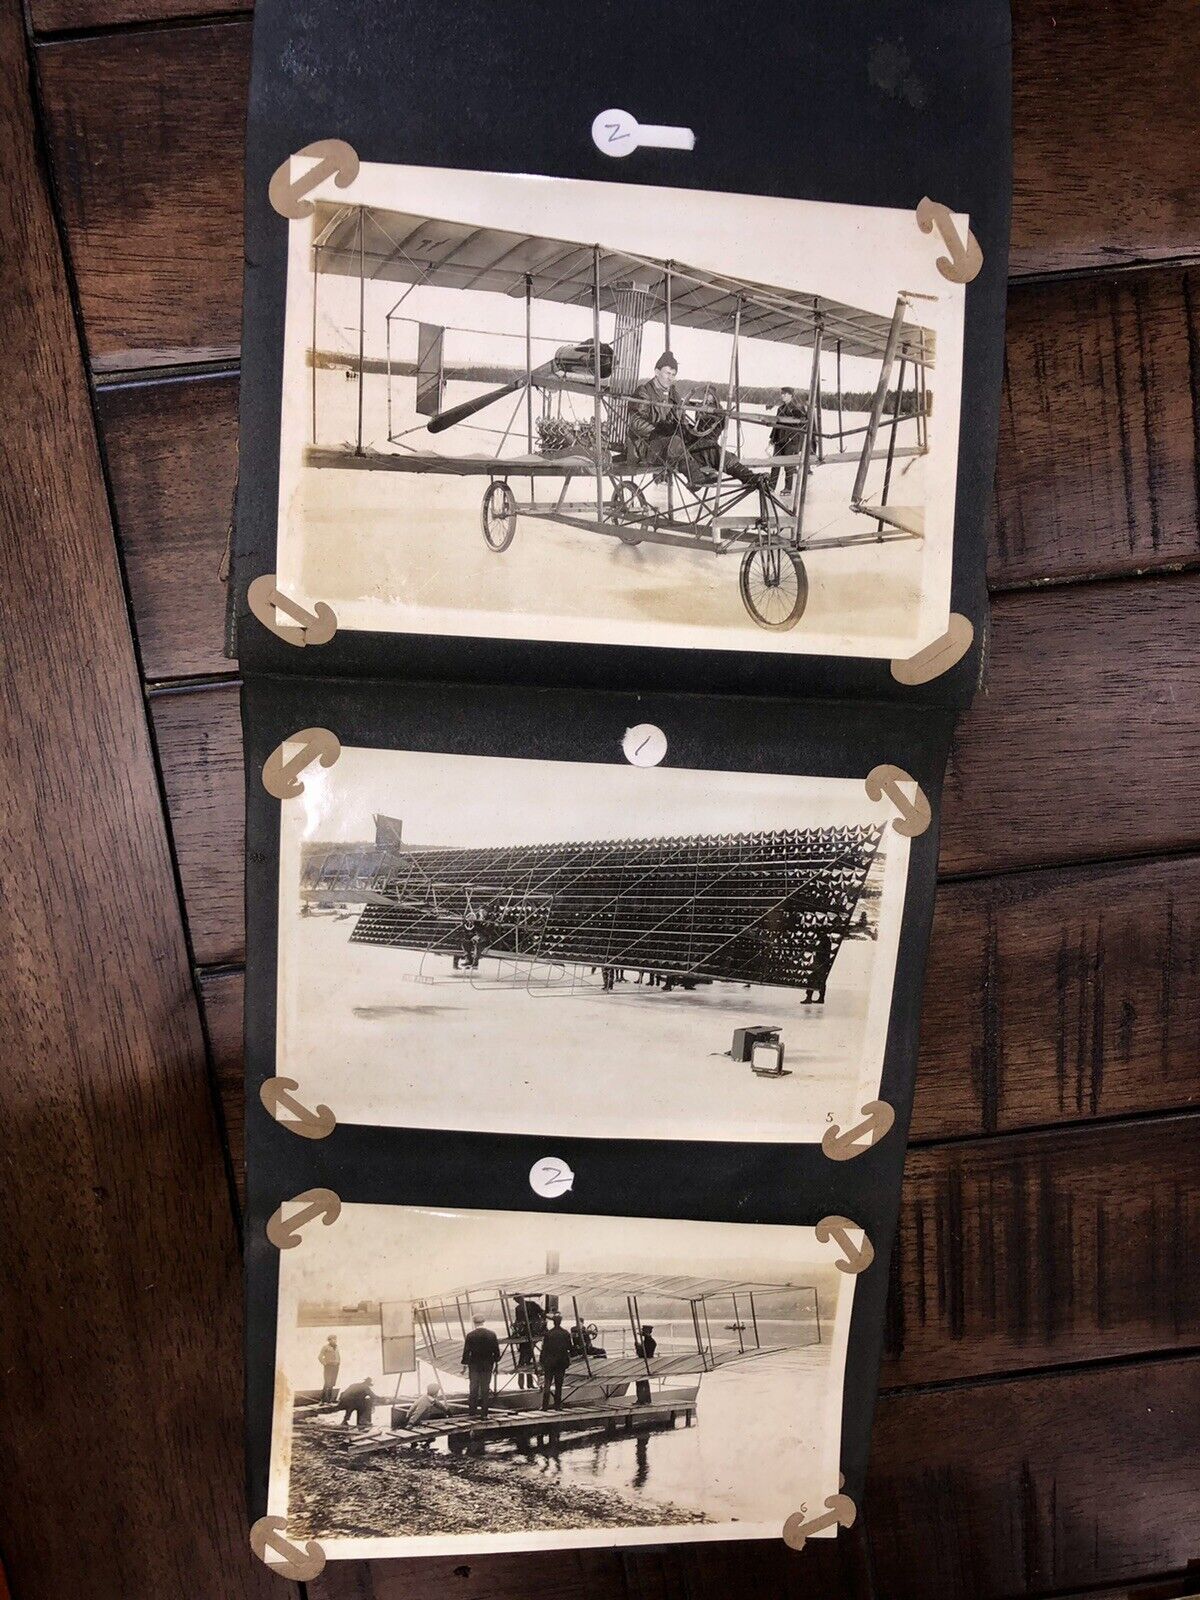 Incredible Airplane History Rare Photos, George Curtiss, Ruth Law + Henry Ford